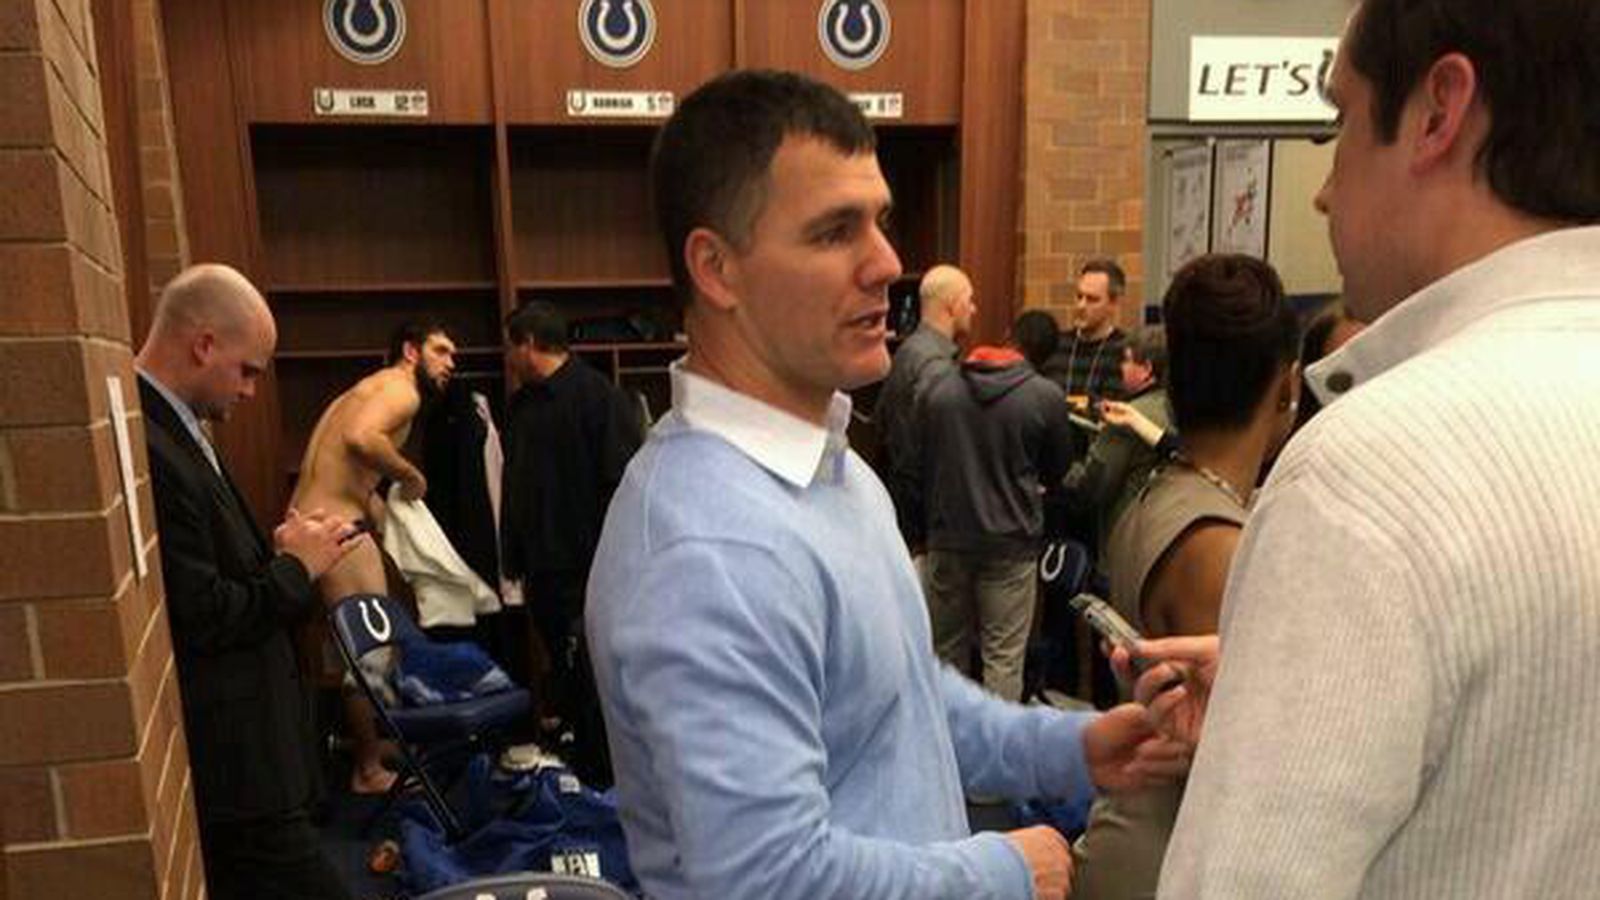 Andrew Lucks Half-Naked Photobomb: Indianapolis Colts 